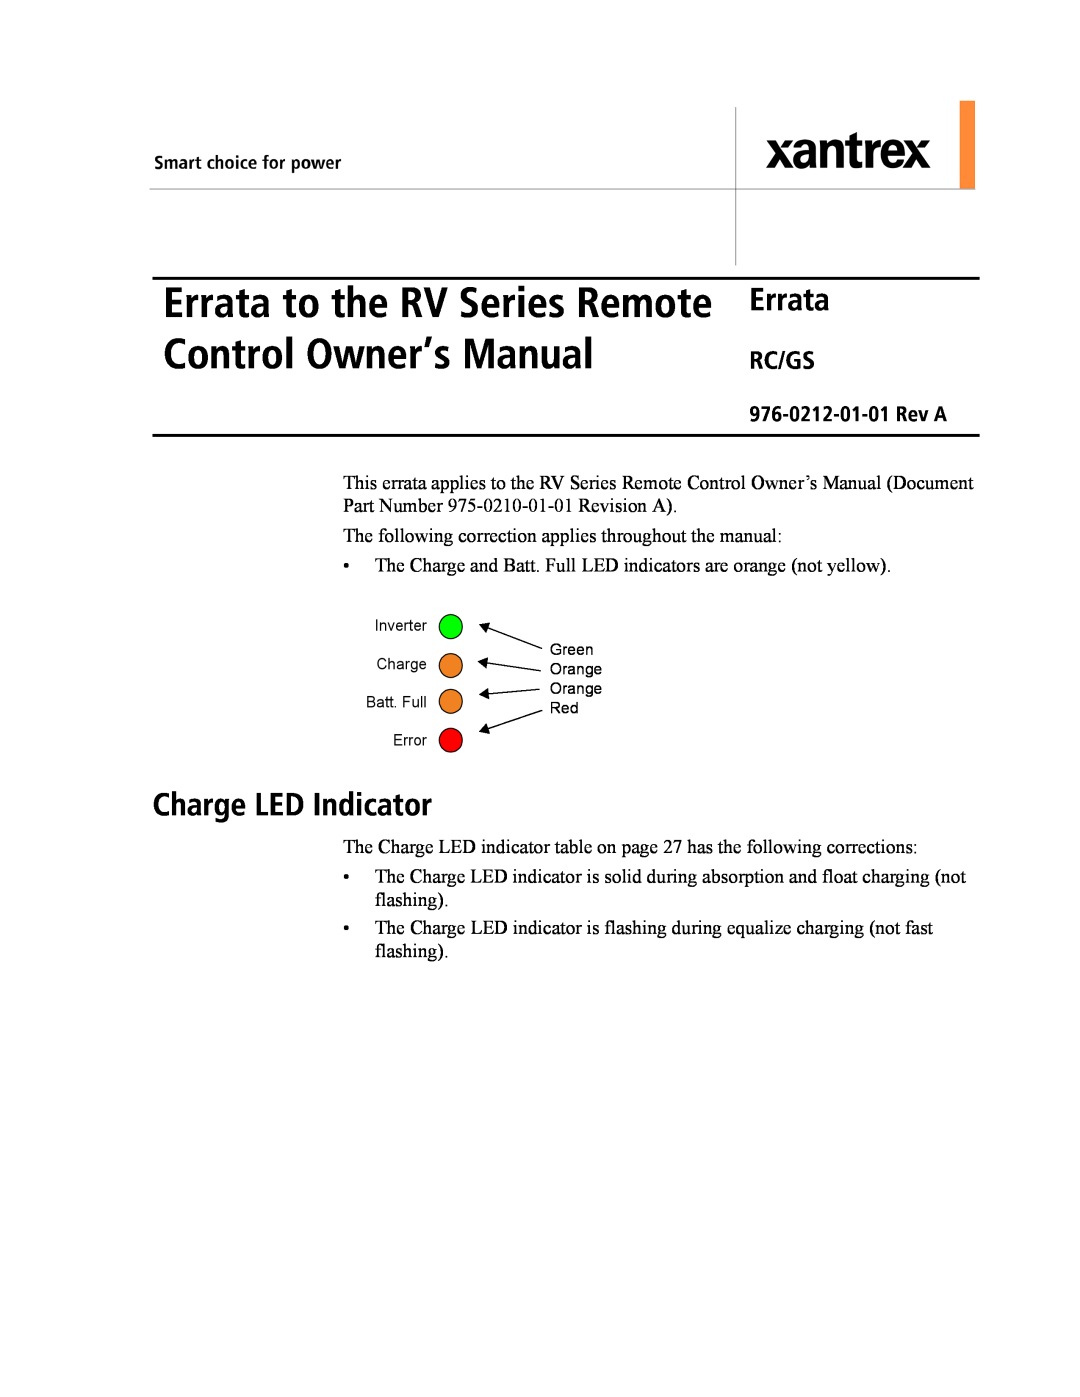 Xantrex Technology 976-0212-01-01 Rev A owner manual Errata, Charge LED Indicator, Rc/Gs 